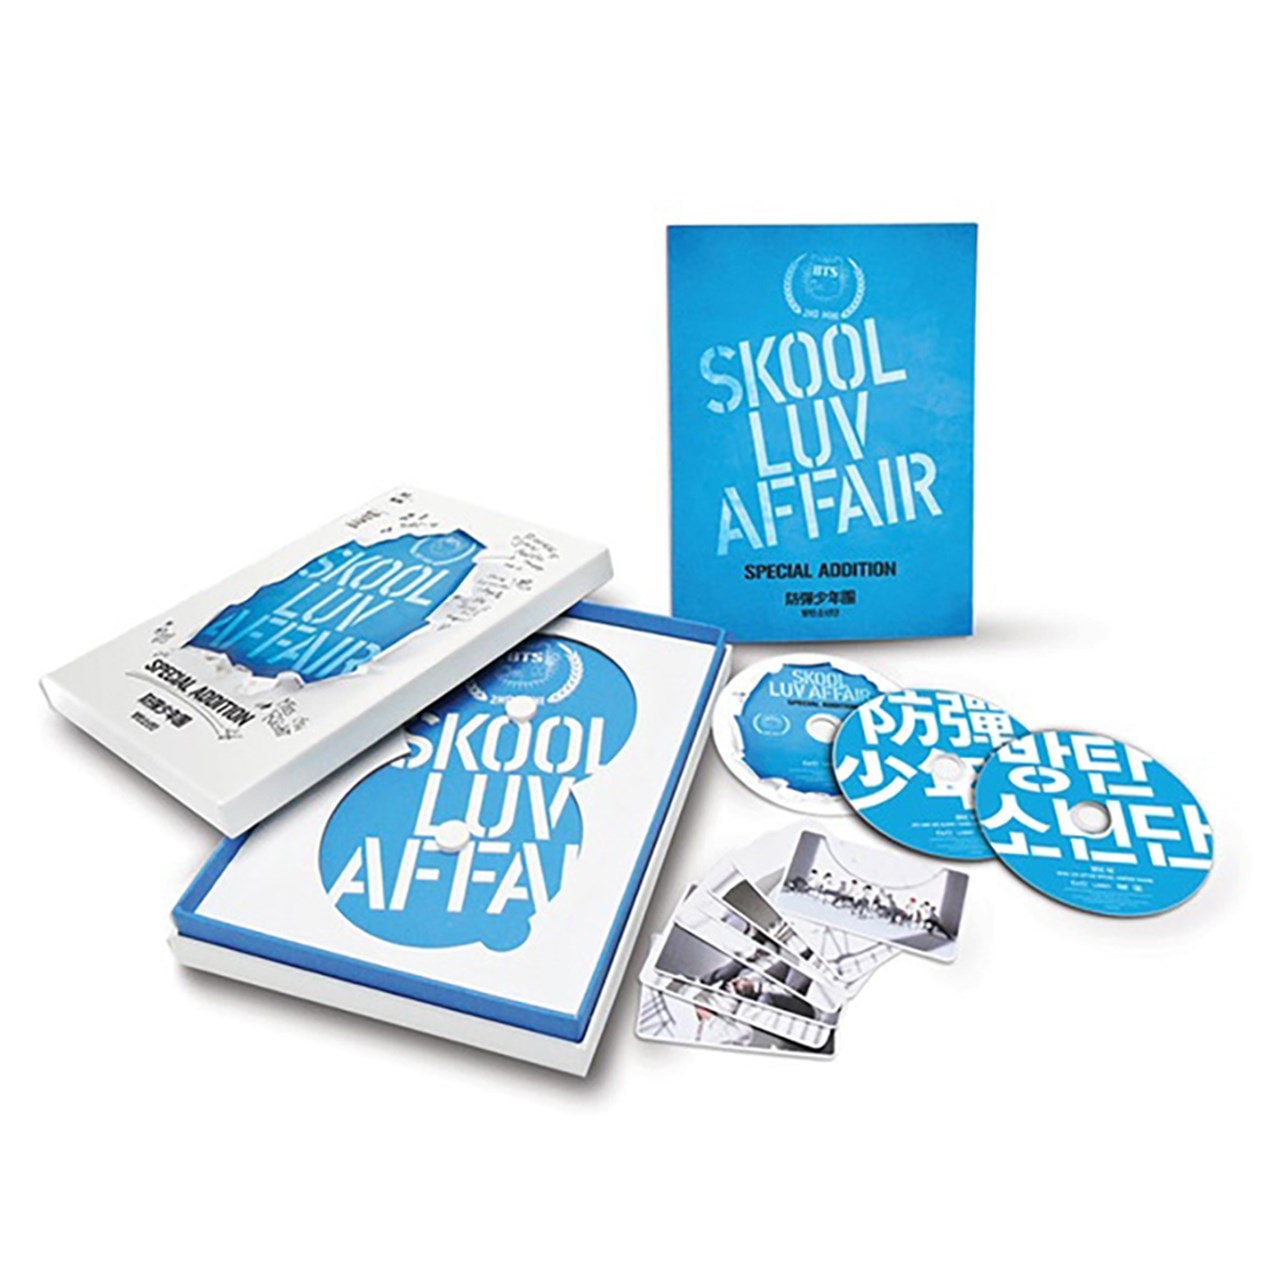 Skool Luv Affair - Special Addition | CD Box Set | Free shipping over £